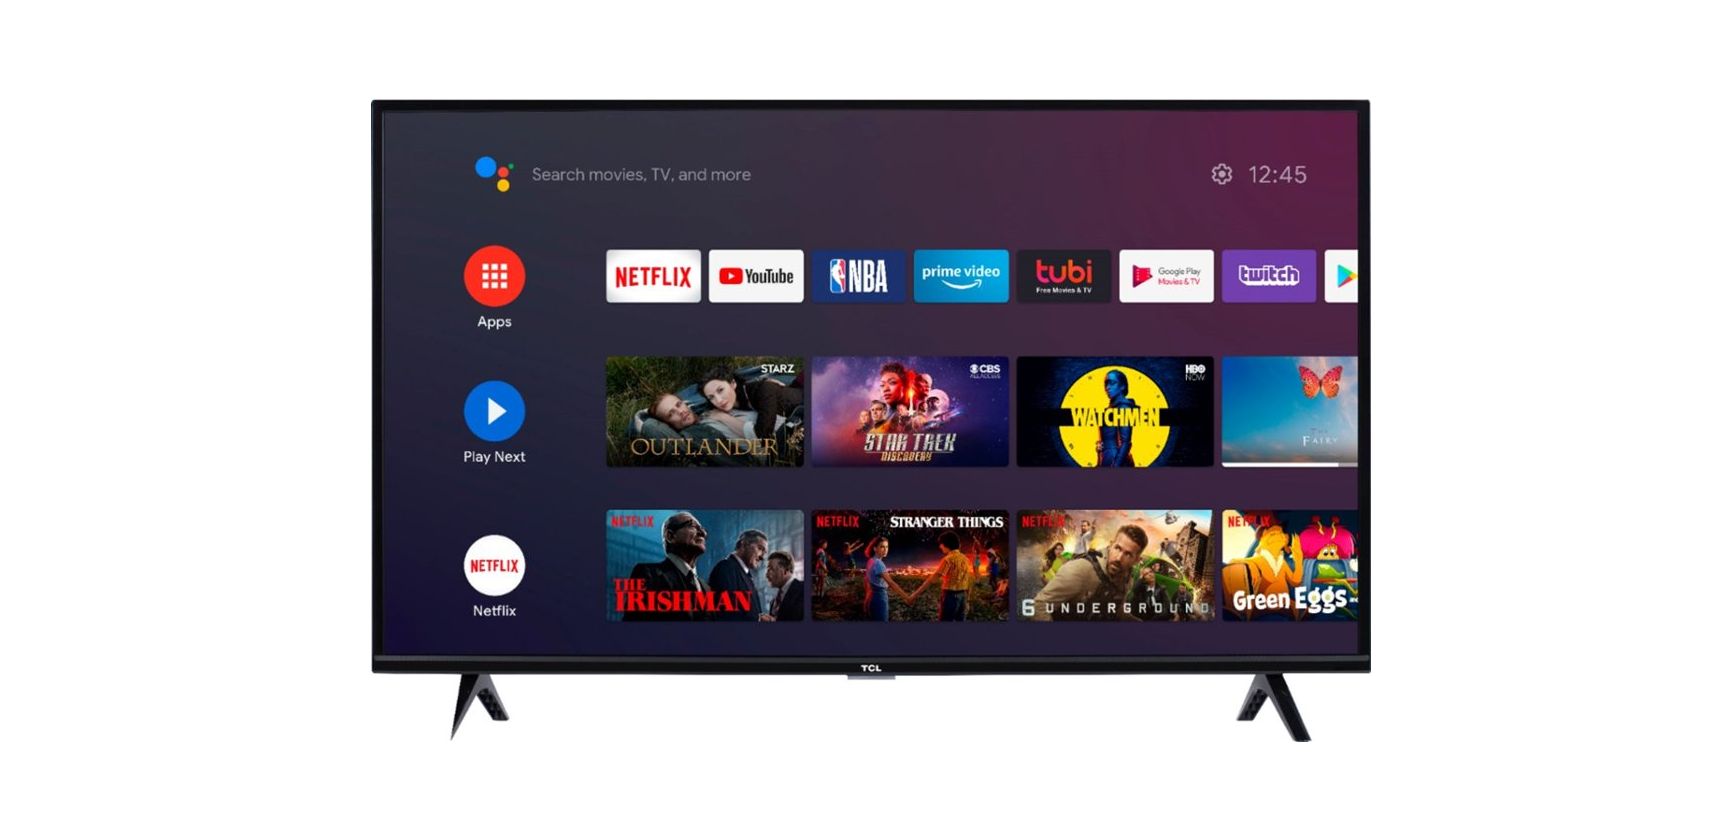 OFF半額 TCL 32S515 HD Smart TV (Android TV) テレビ